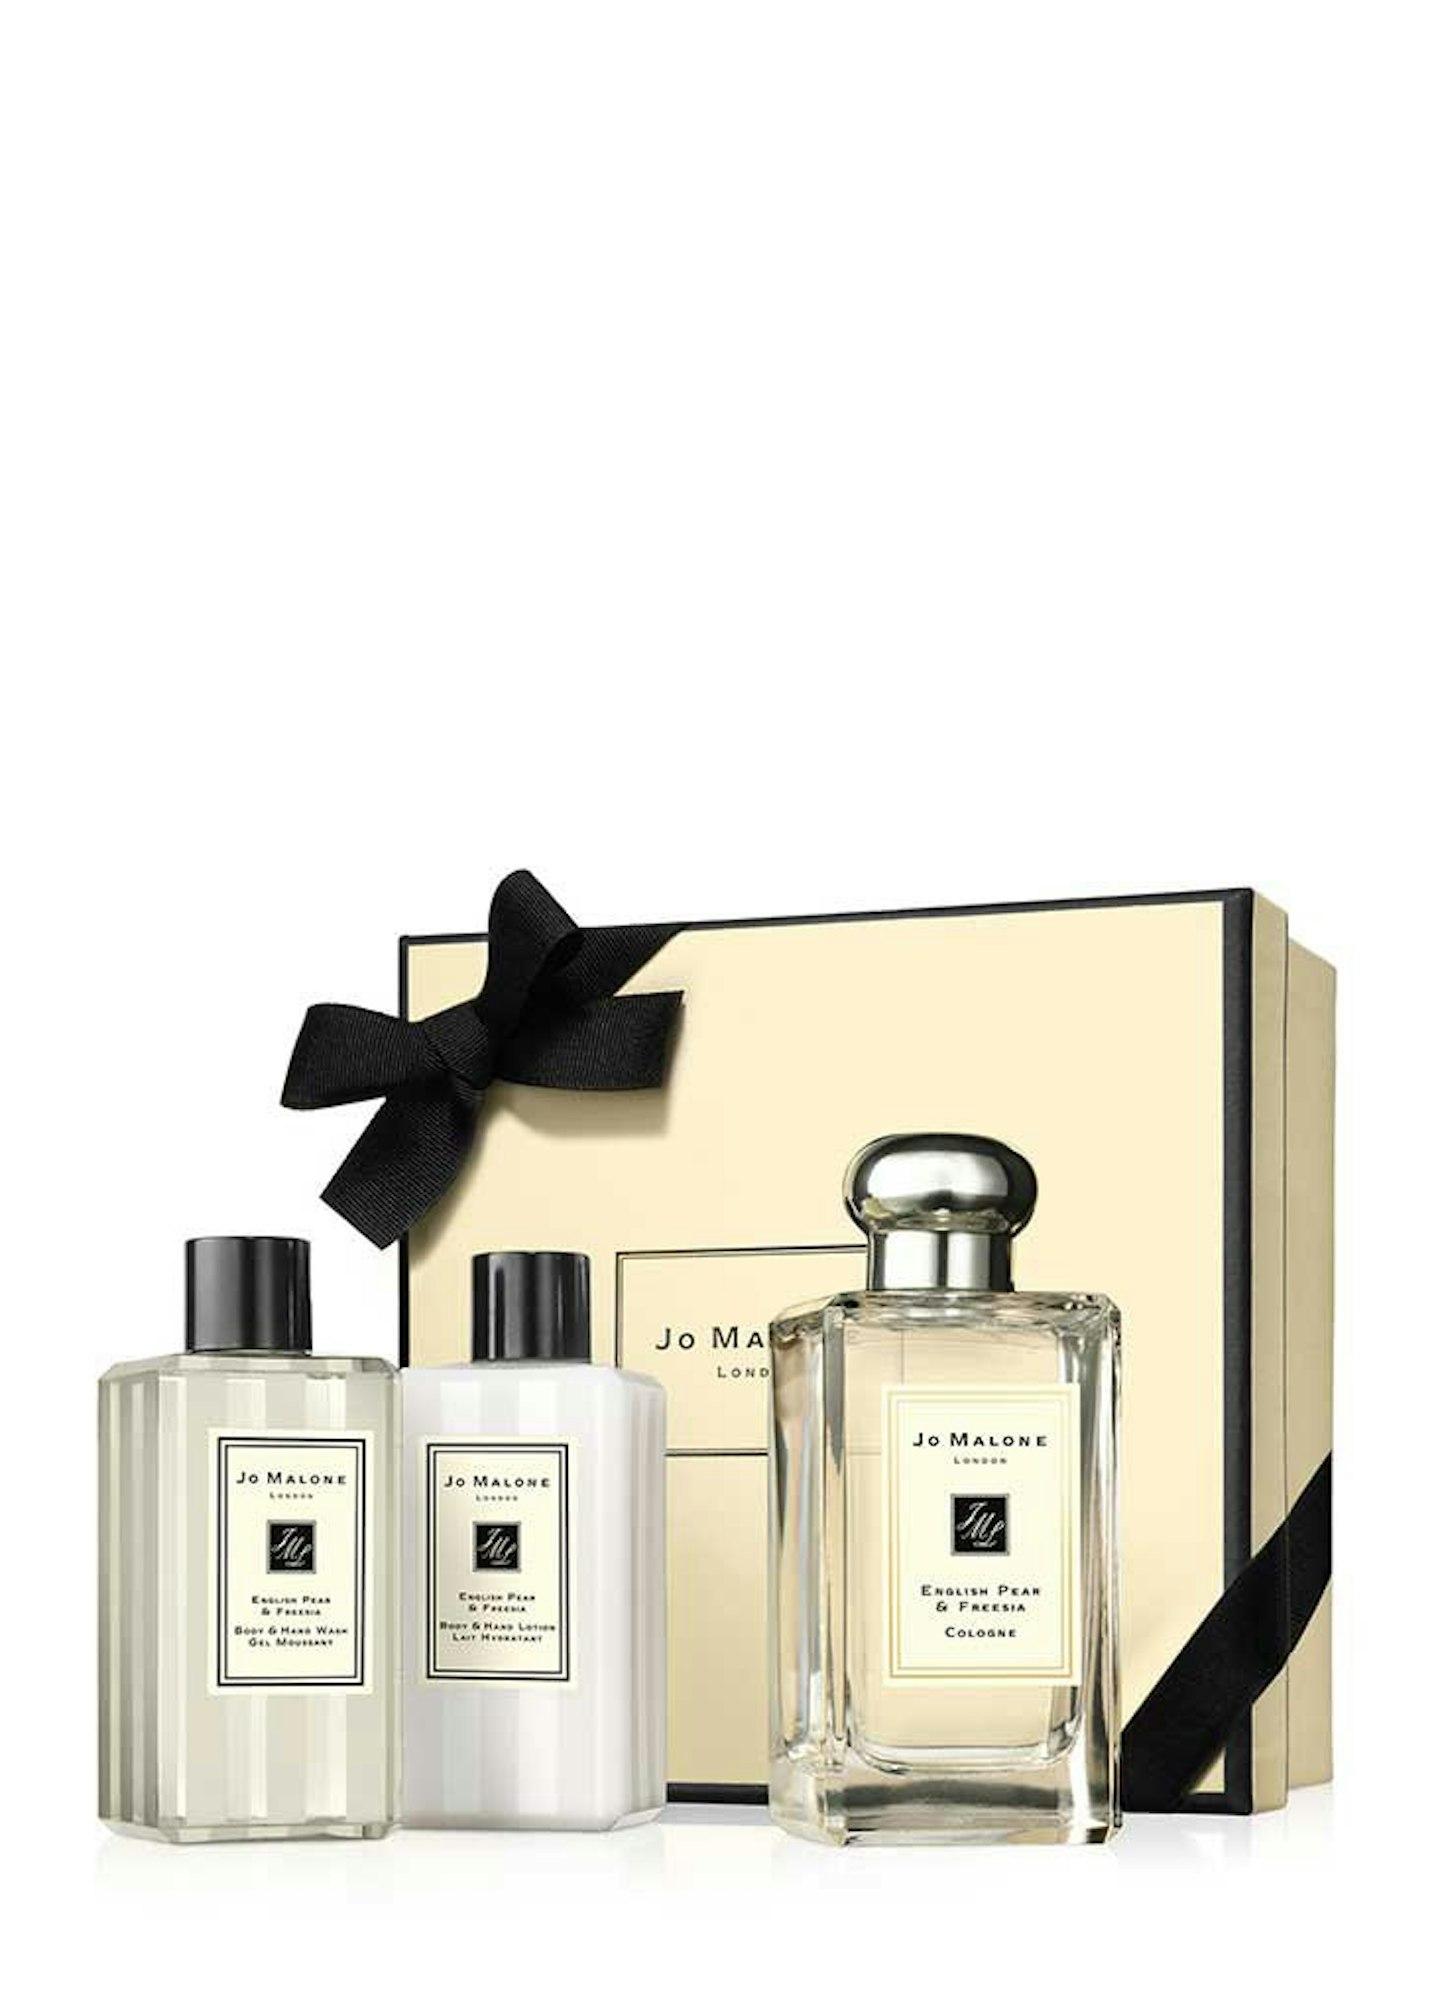 Jo Malone English Pear and Freesia cologne – Duty Free RRP £84.80 for cologne and lotion set.